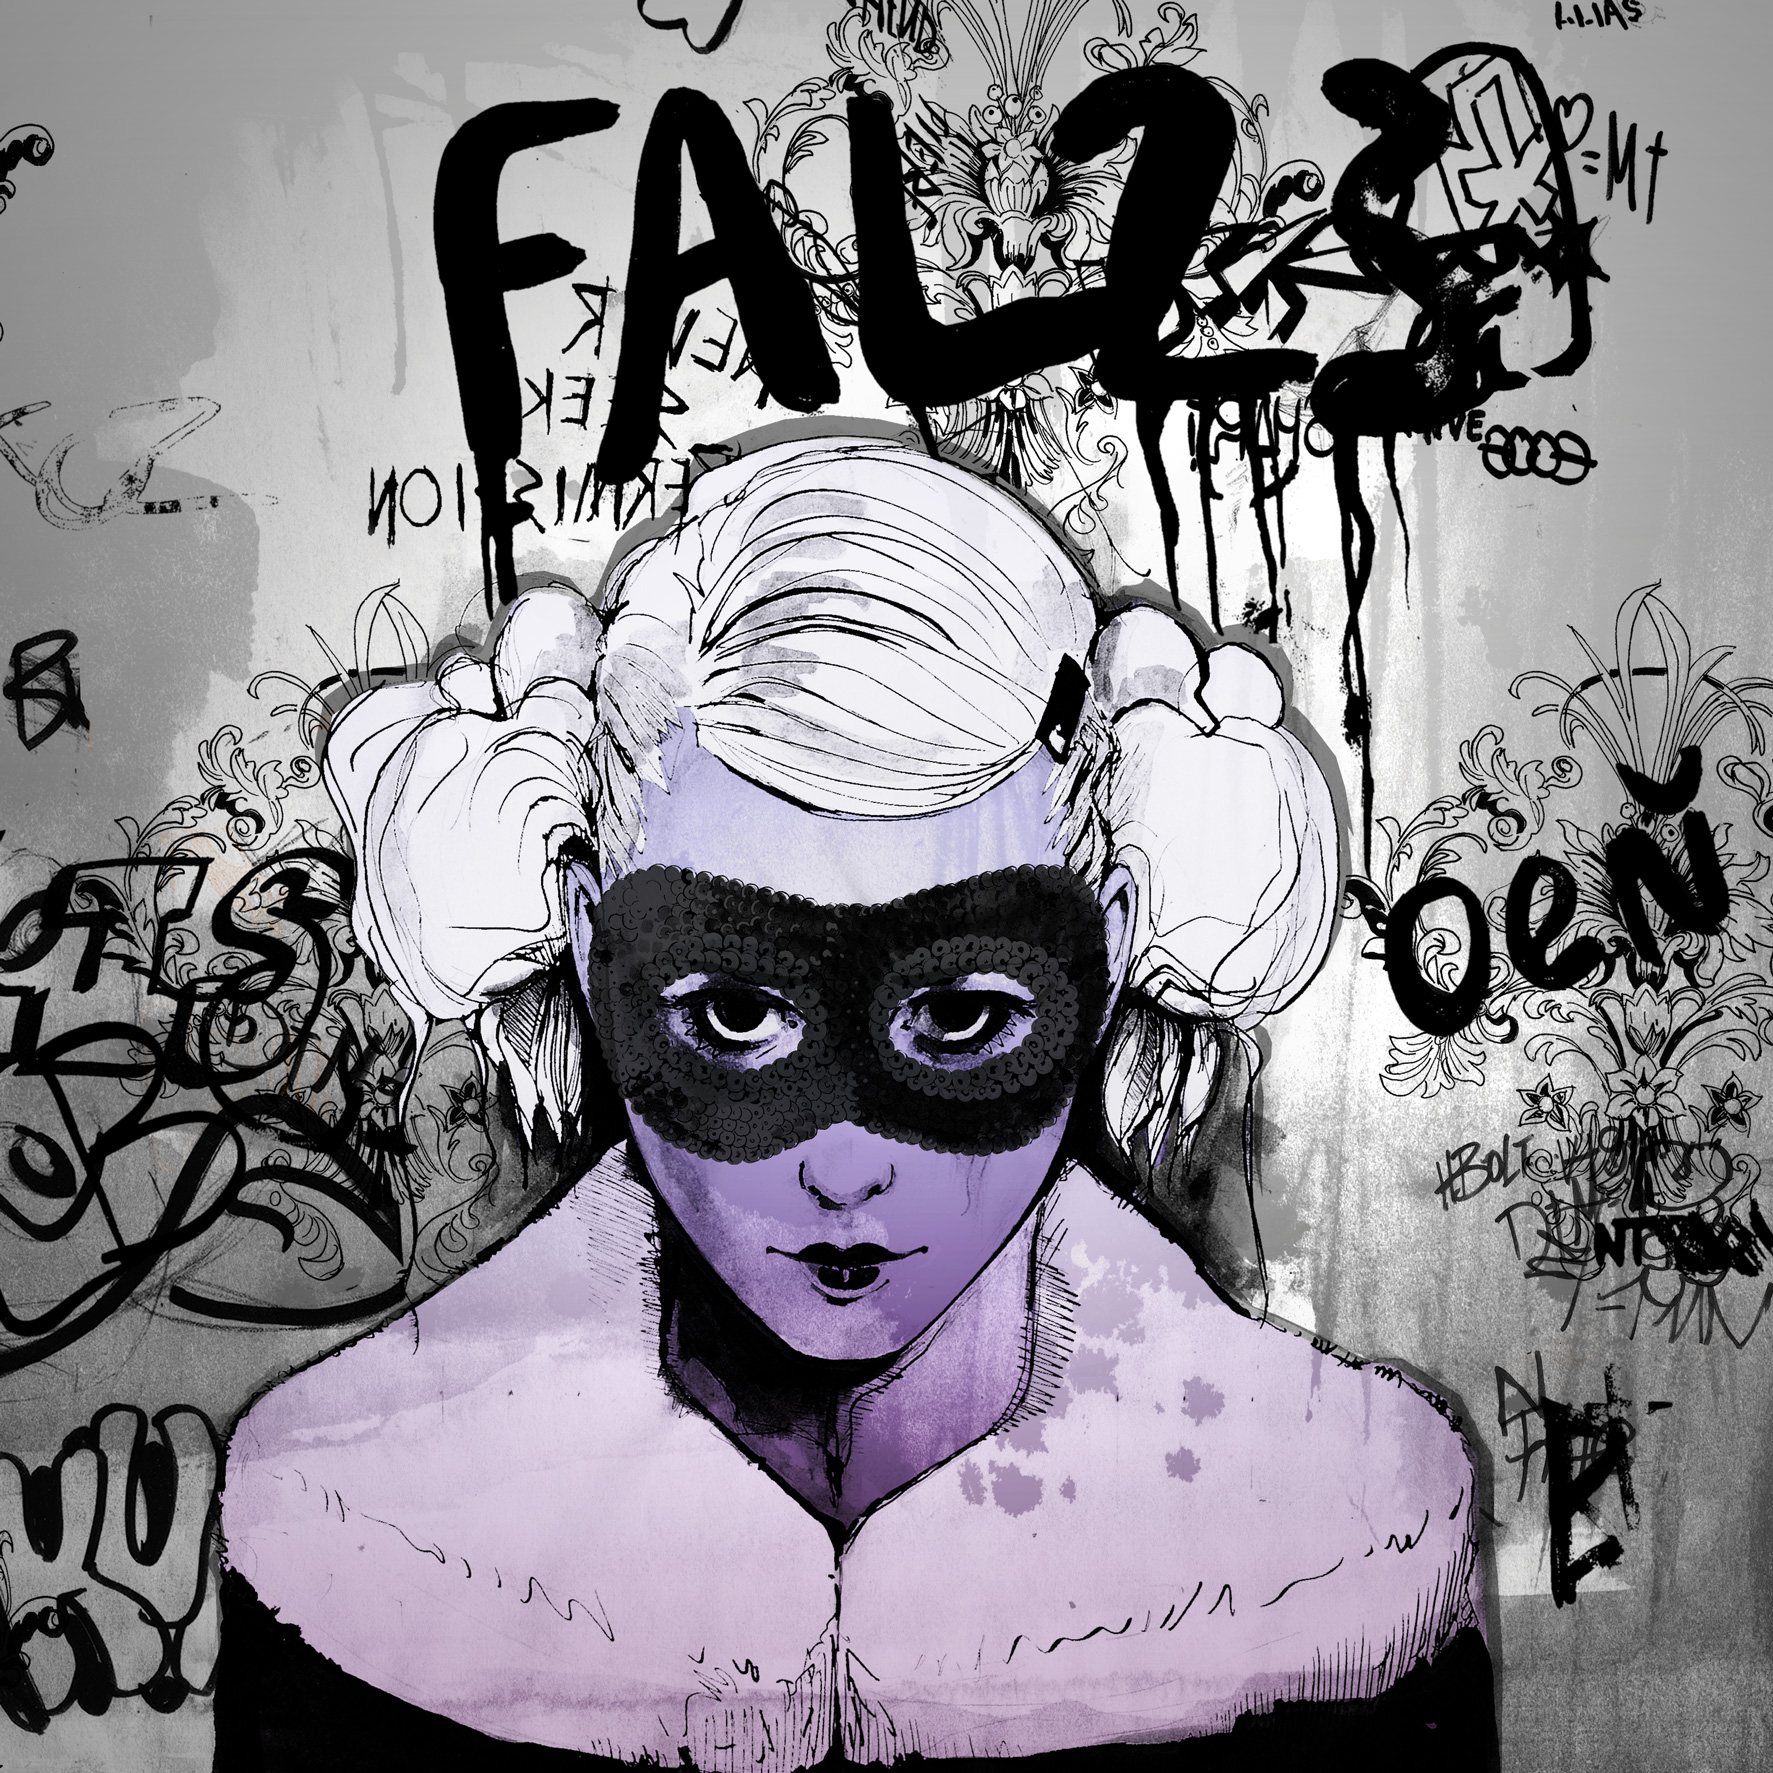 Portrait of a girl wearing a mask against a graffitied wall